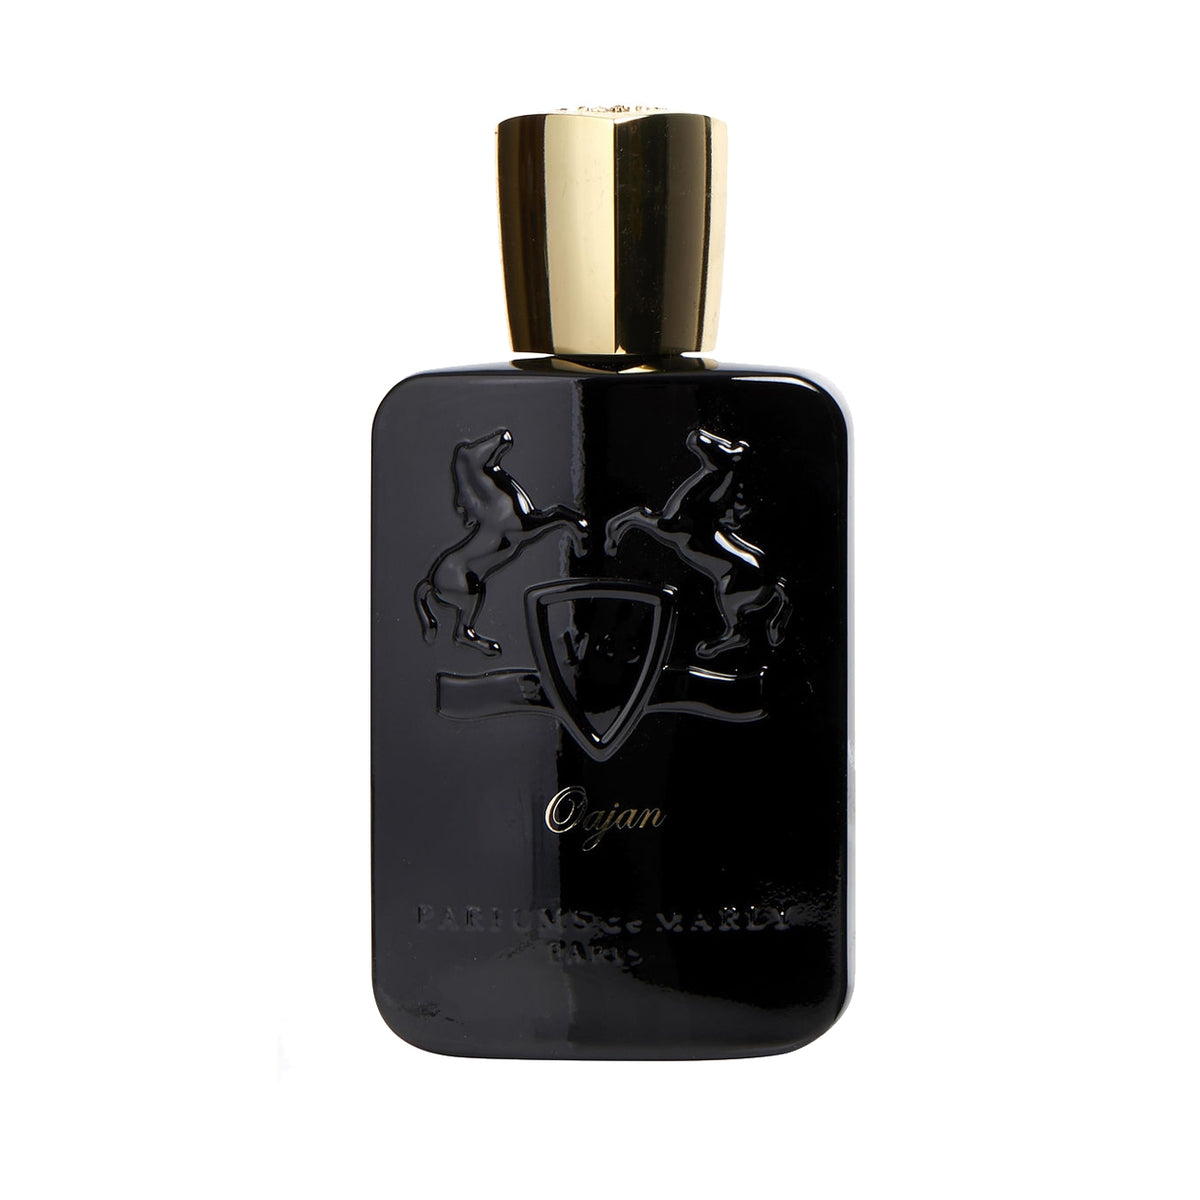 Oajan by Parfums Marly Fragrance Samples | | Eau de Scent Sampler and Travel Size Perfume